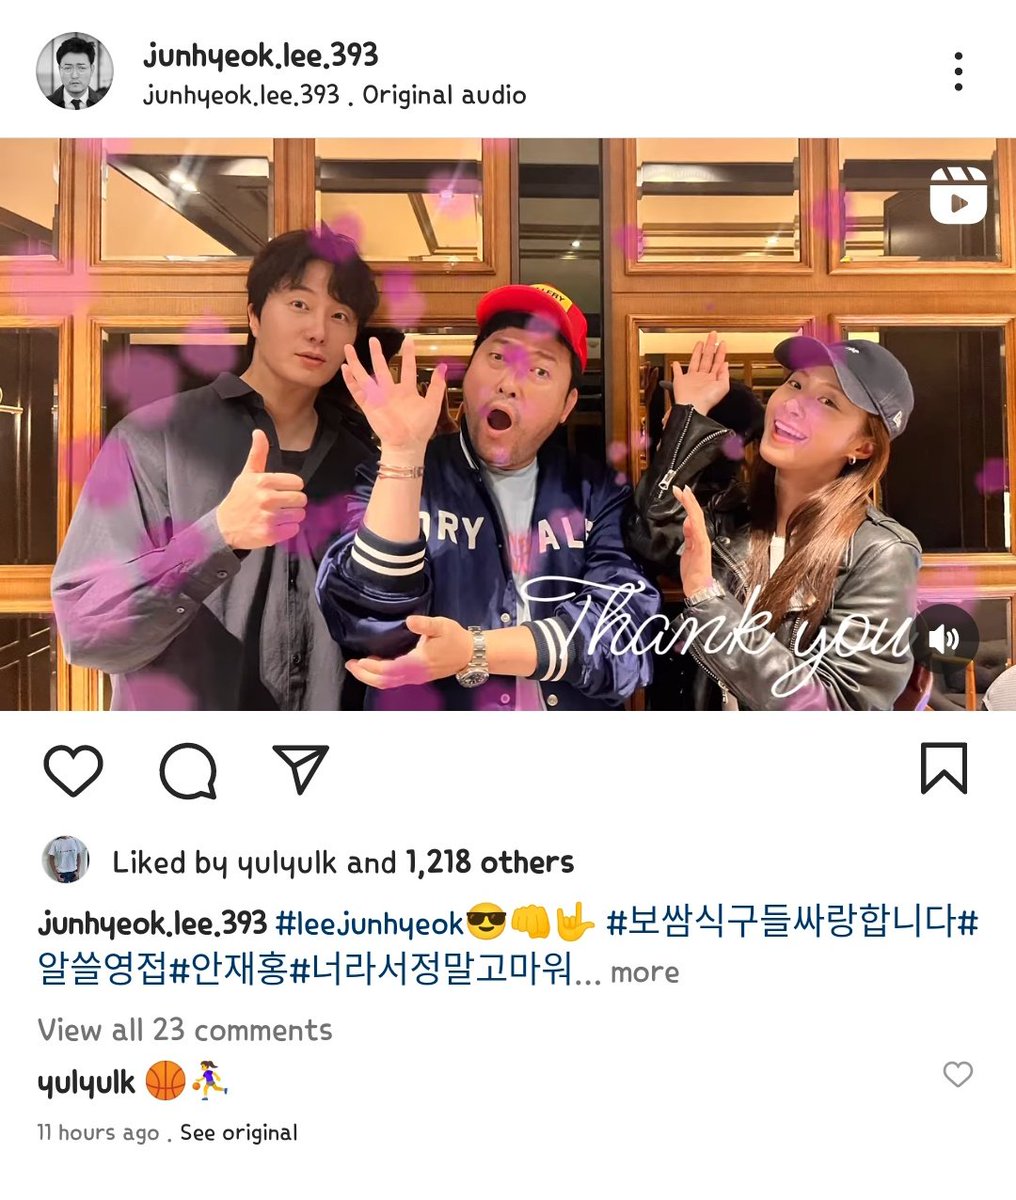 They have another pose from the previous one, and yuri liked and commented on this post 😍
#JungIlWoo #KwonYuri #LeeJunhyeok #jilwww #yulyulk